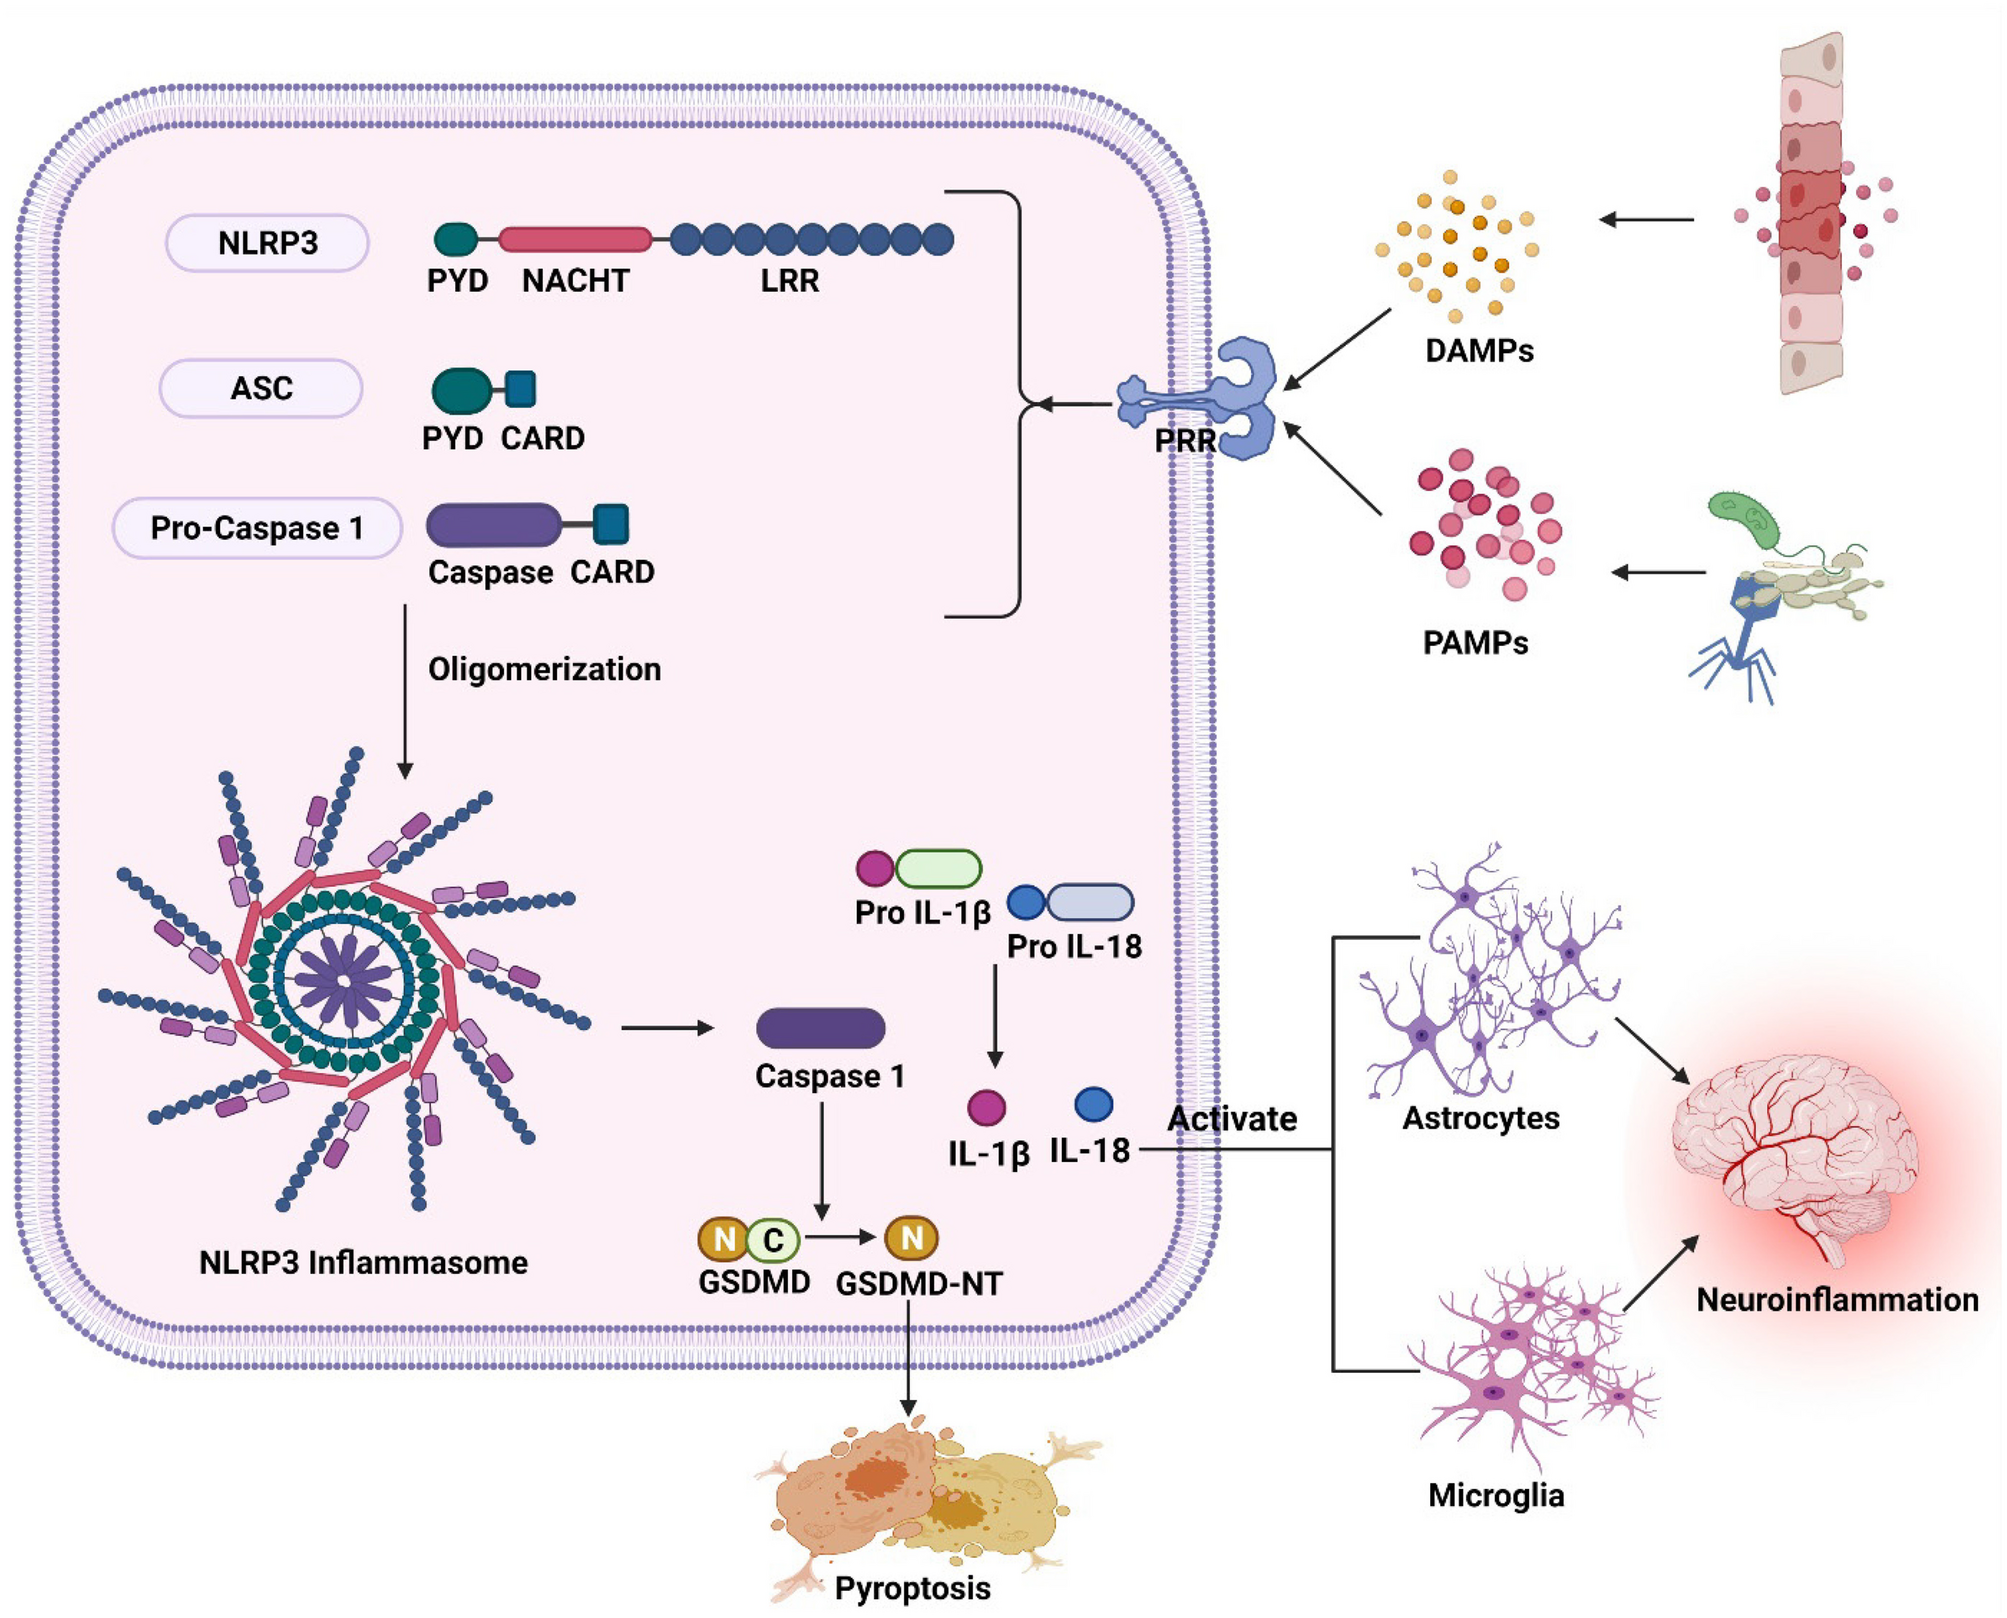 New Insights on NLRP3 Inflammasome: Mechanisms of Activation, Inhibition, and Epigenetic Regulation